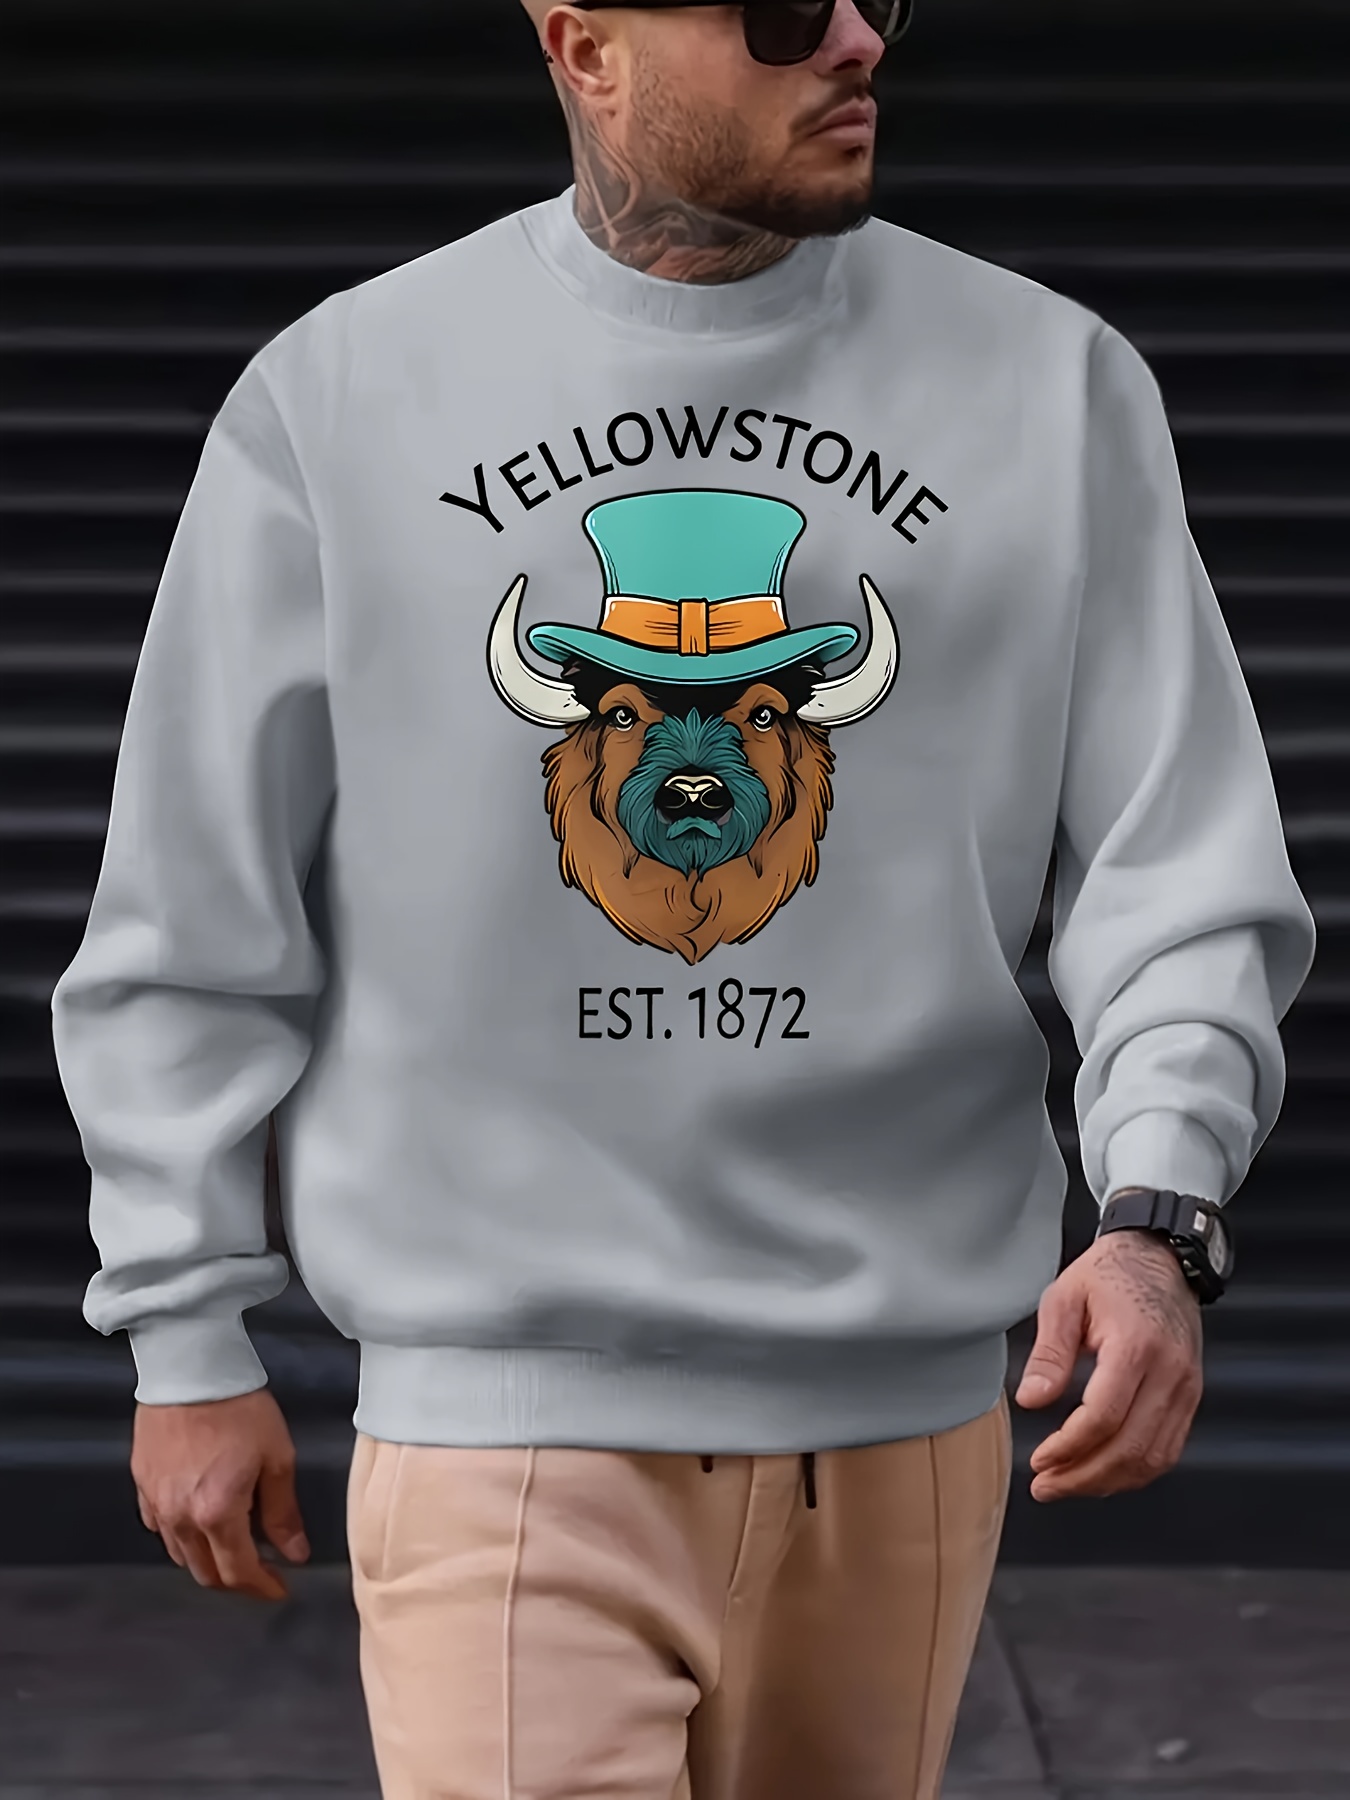 1pc Embroidered Yellowstone Baseball For Men And Women Water